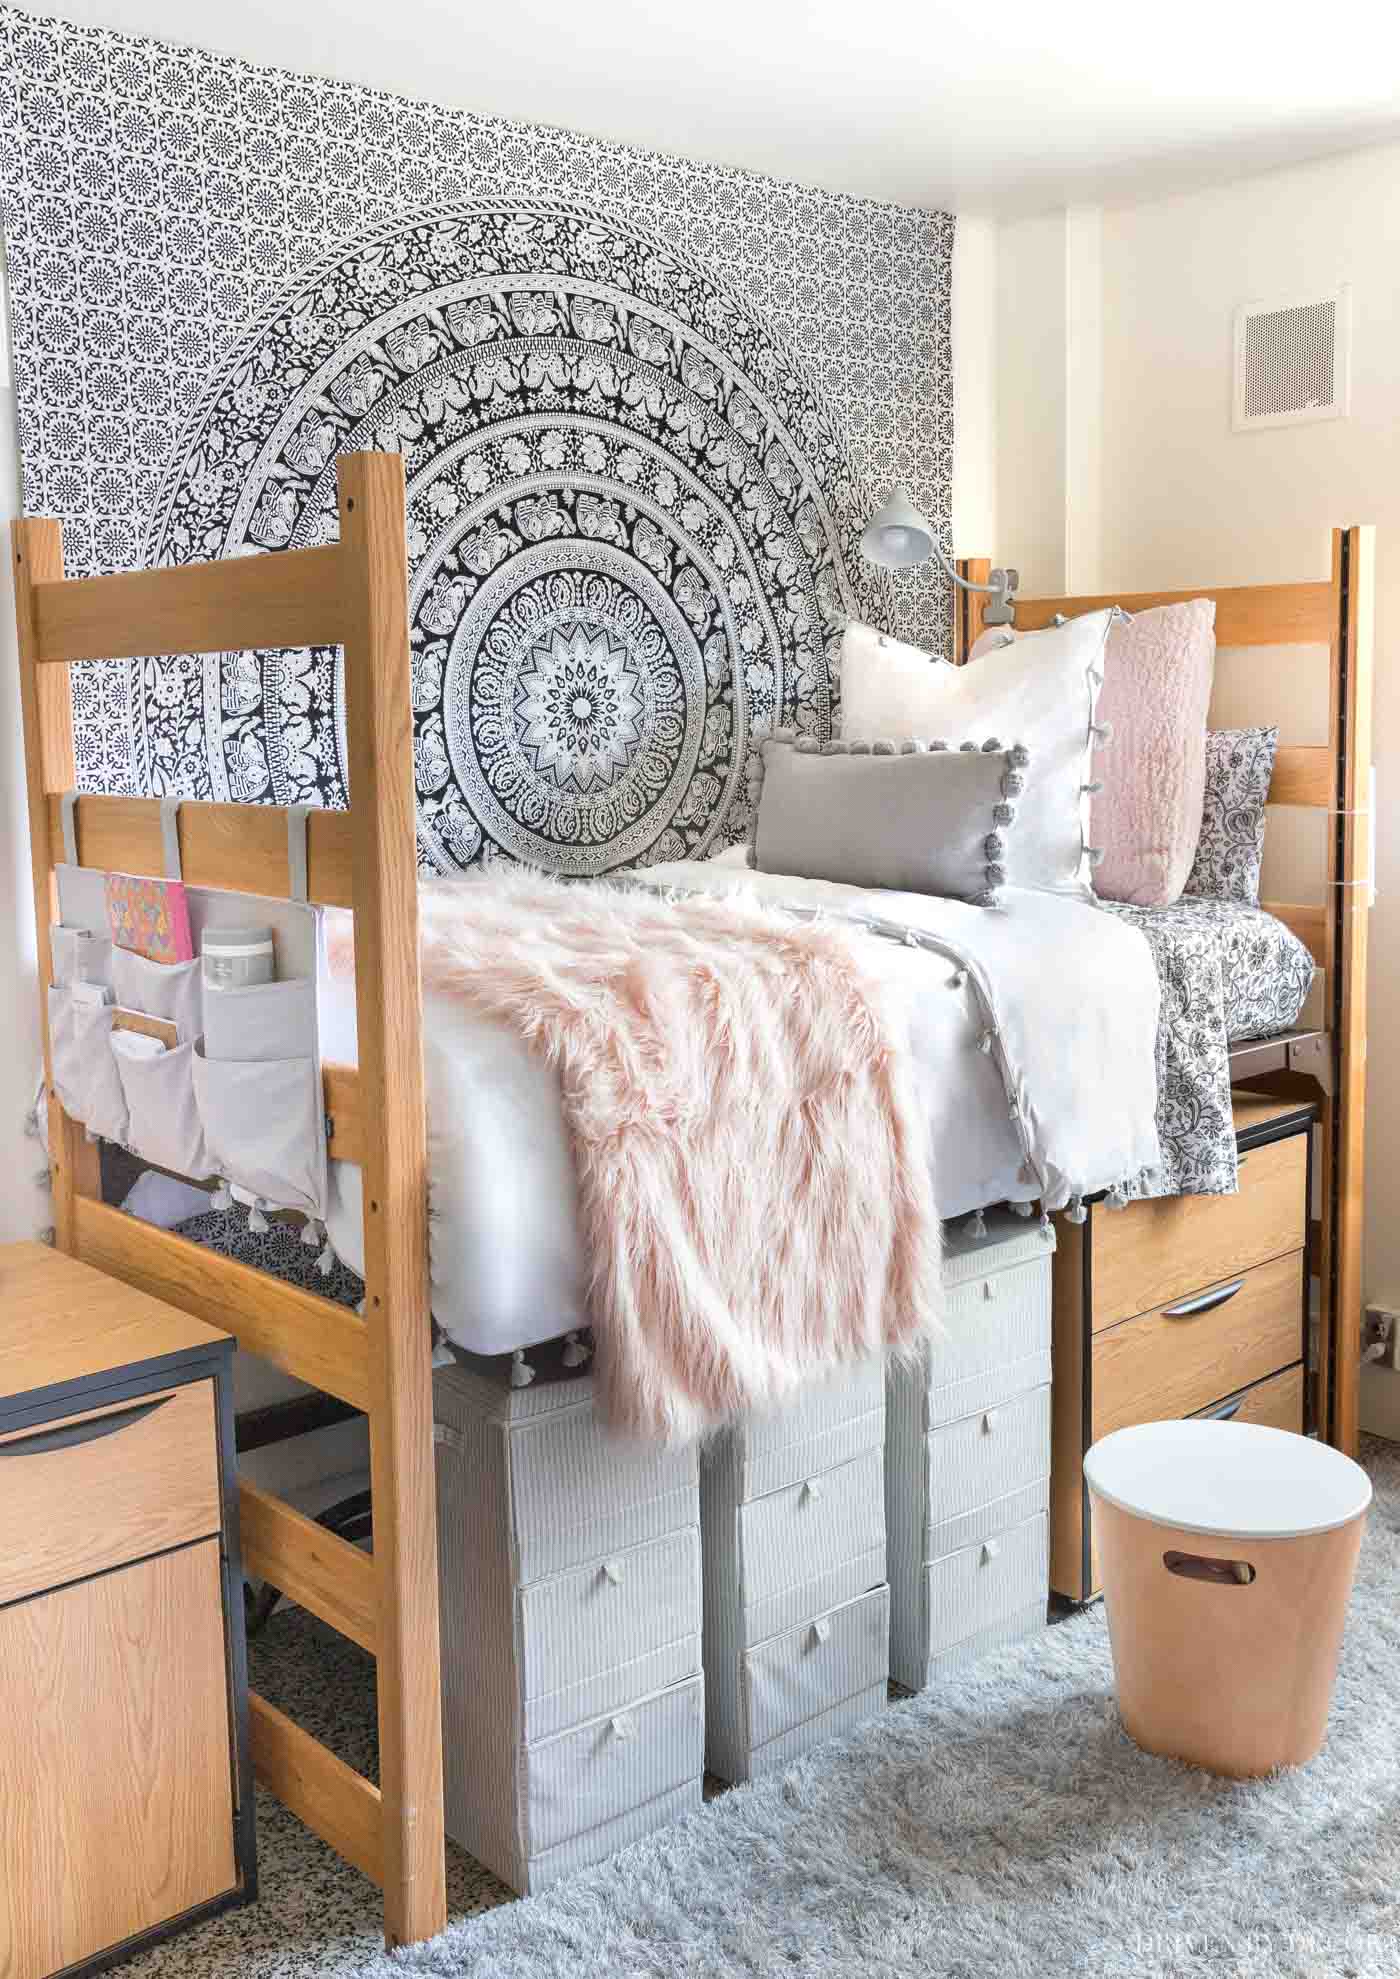 Love all of these ideas for a girls dorm room!!